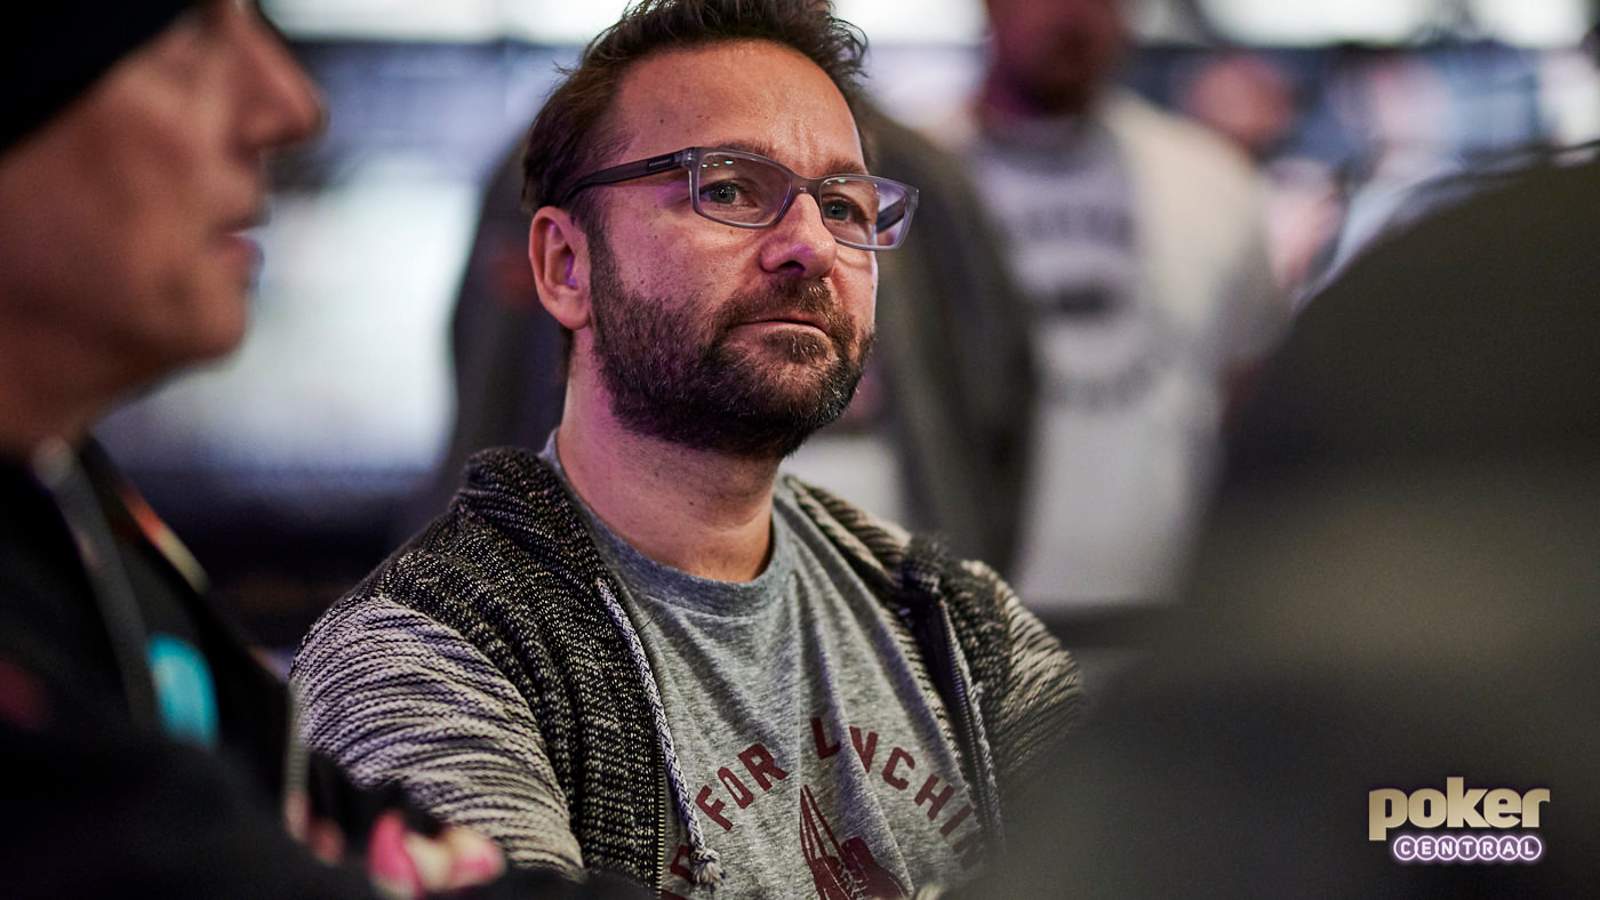 WSOP Report Day #21 - Negreanu Leads Seven Card Stud Final Table, Cheong on Brink of First Bracelet